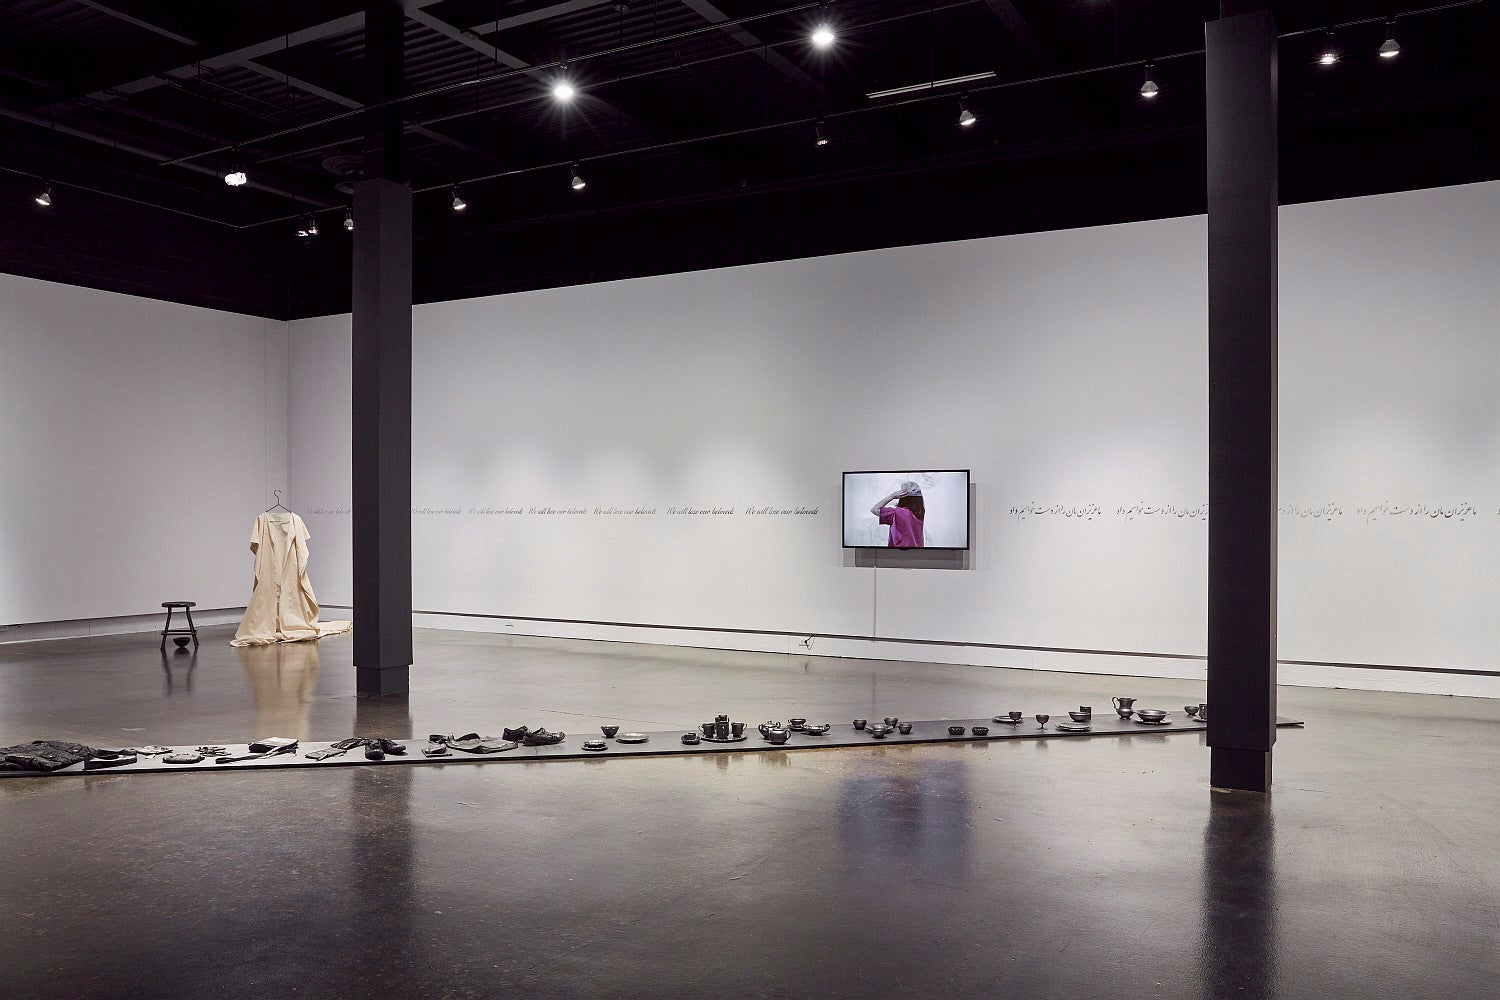 Art gallery exhibition with a video monitor, text running along the wall, a canvas dress hung from the ceiling and a row of blackened objects on the floor.